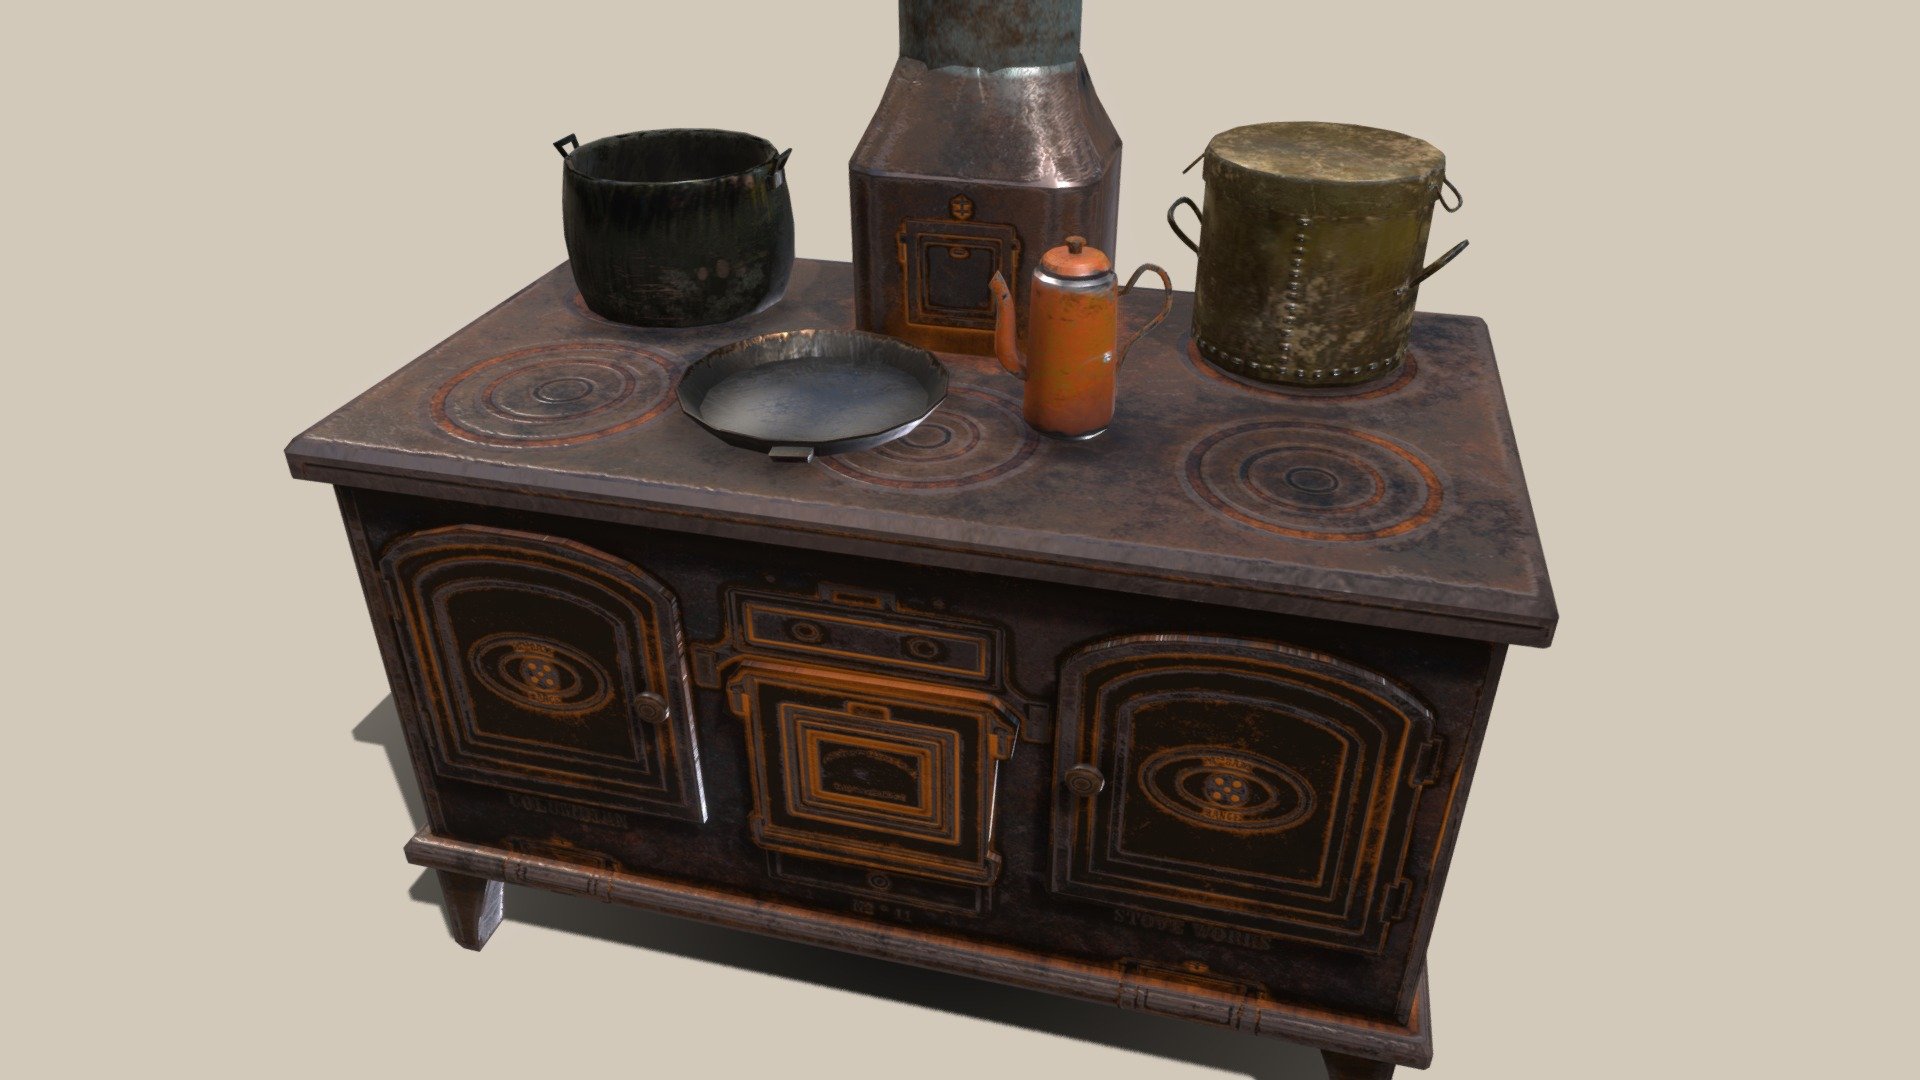 Game-ready optimized old stove with pots. Ready for videogame use. Unly 1,8 K vertices.
Perfect to complete an old rusty kitchen in a videogame 3d model